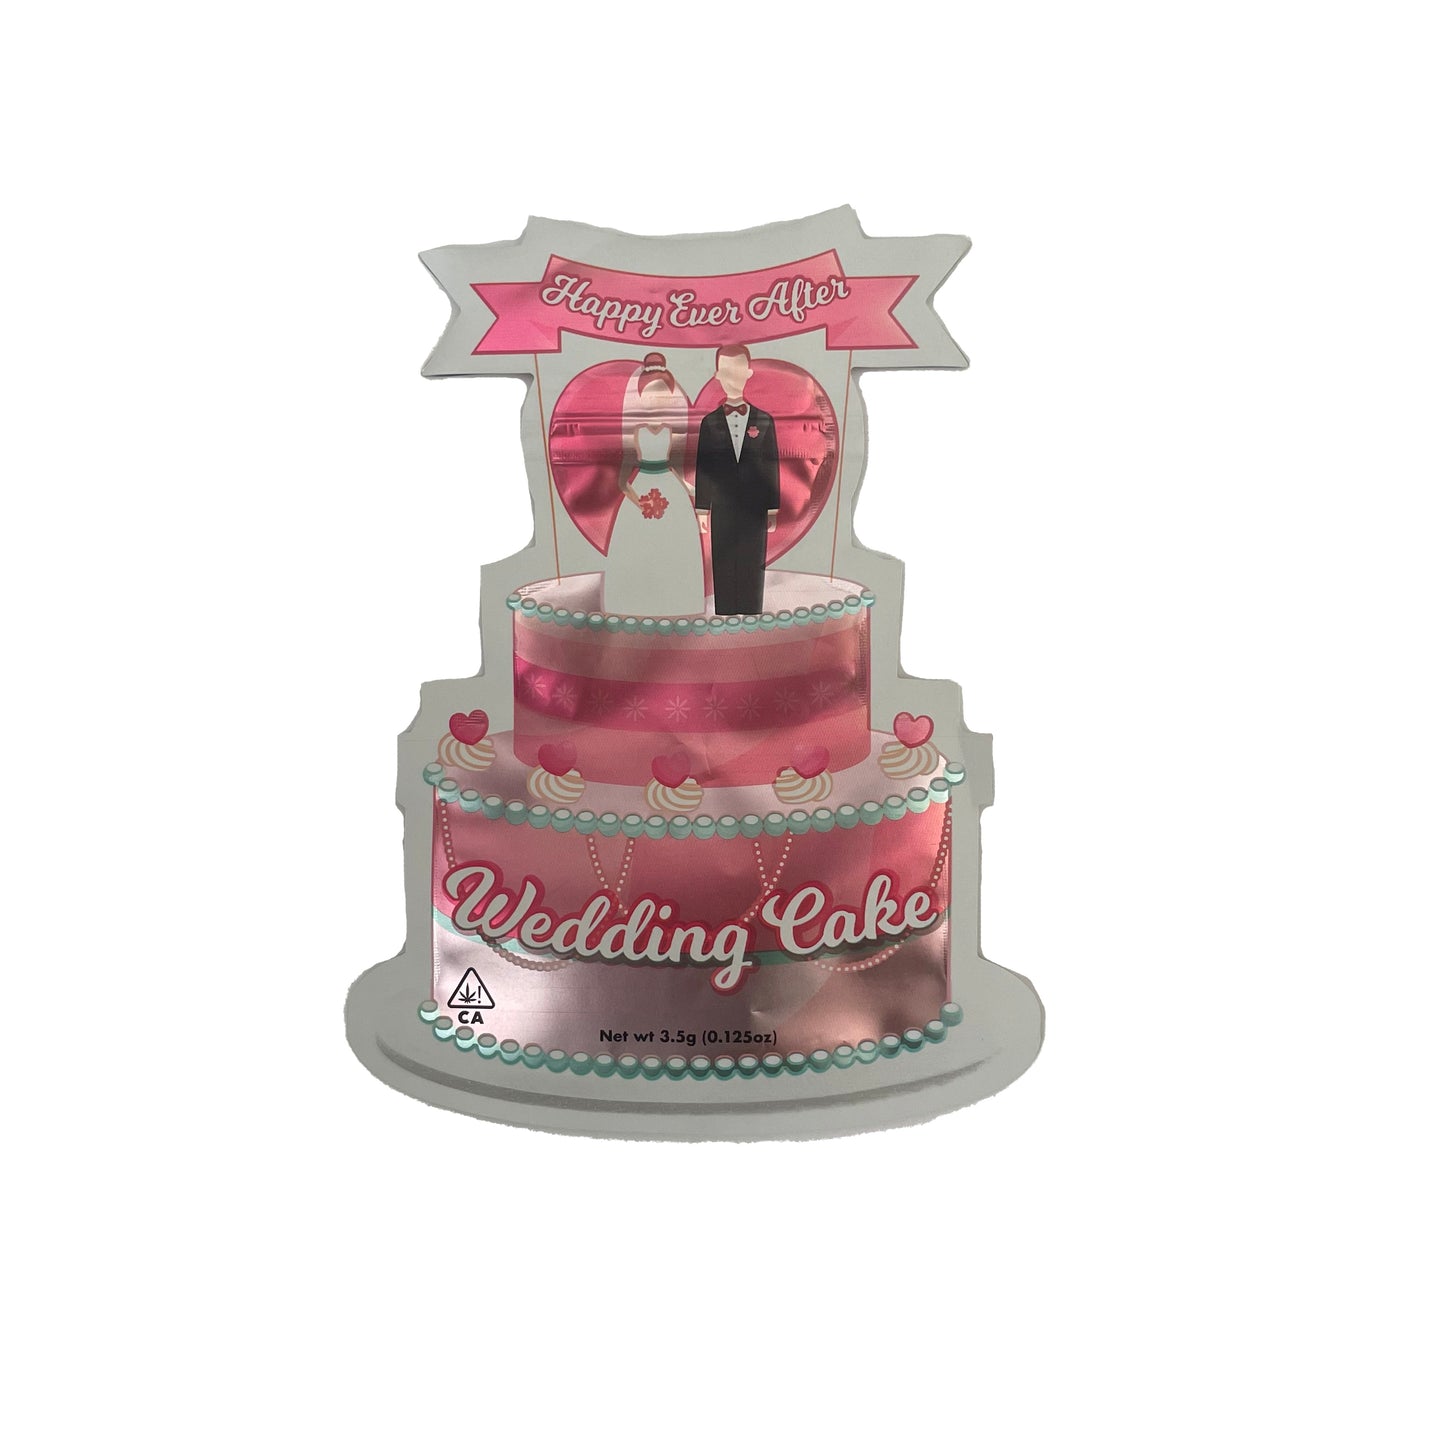 Wedding Cake- Happily Ever After Cutout 3.5G Mylar Bags